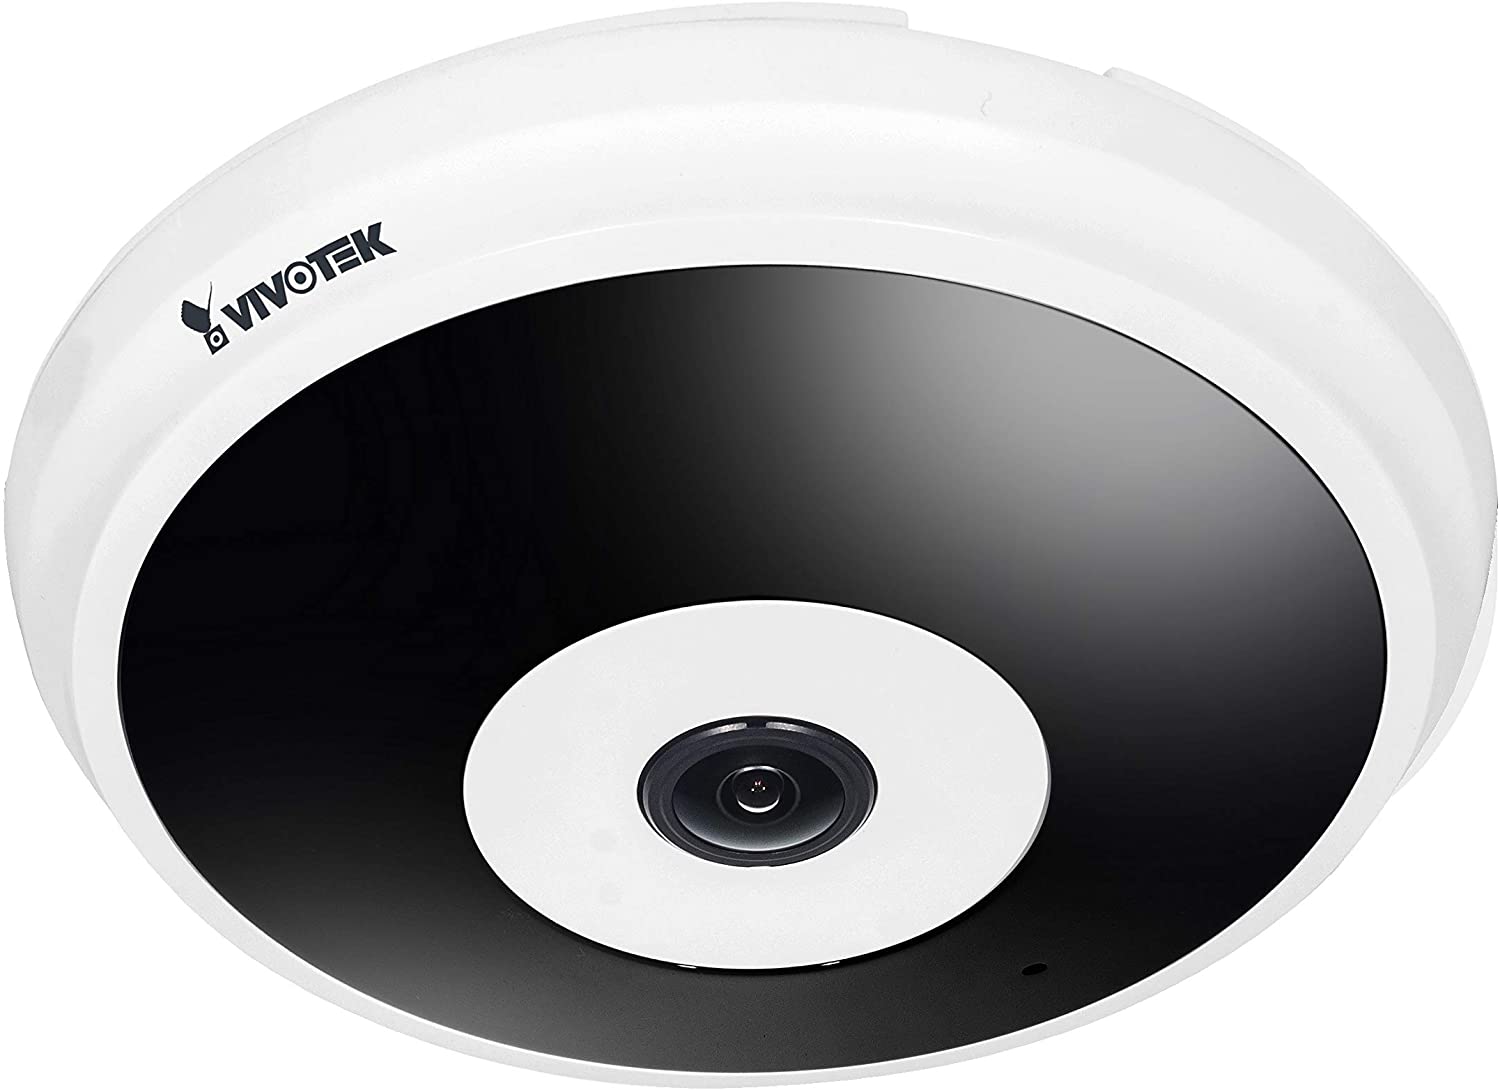 VIVOTEK Fixed Dome Network Camera FD9182-H Specifications